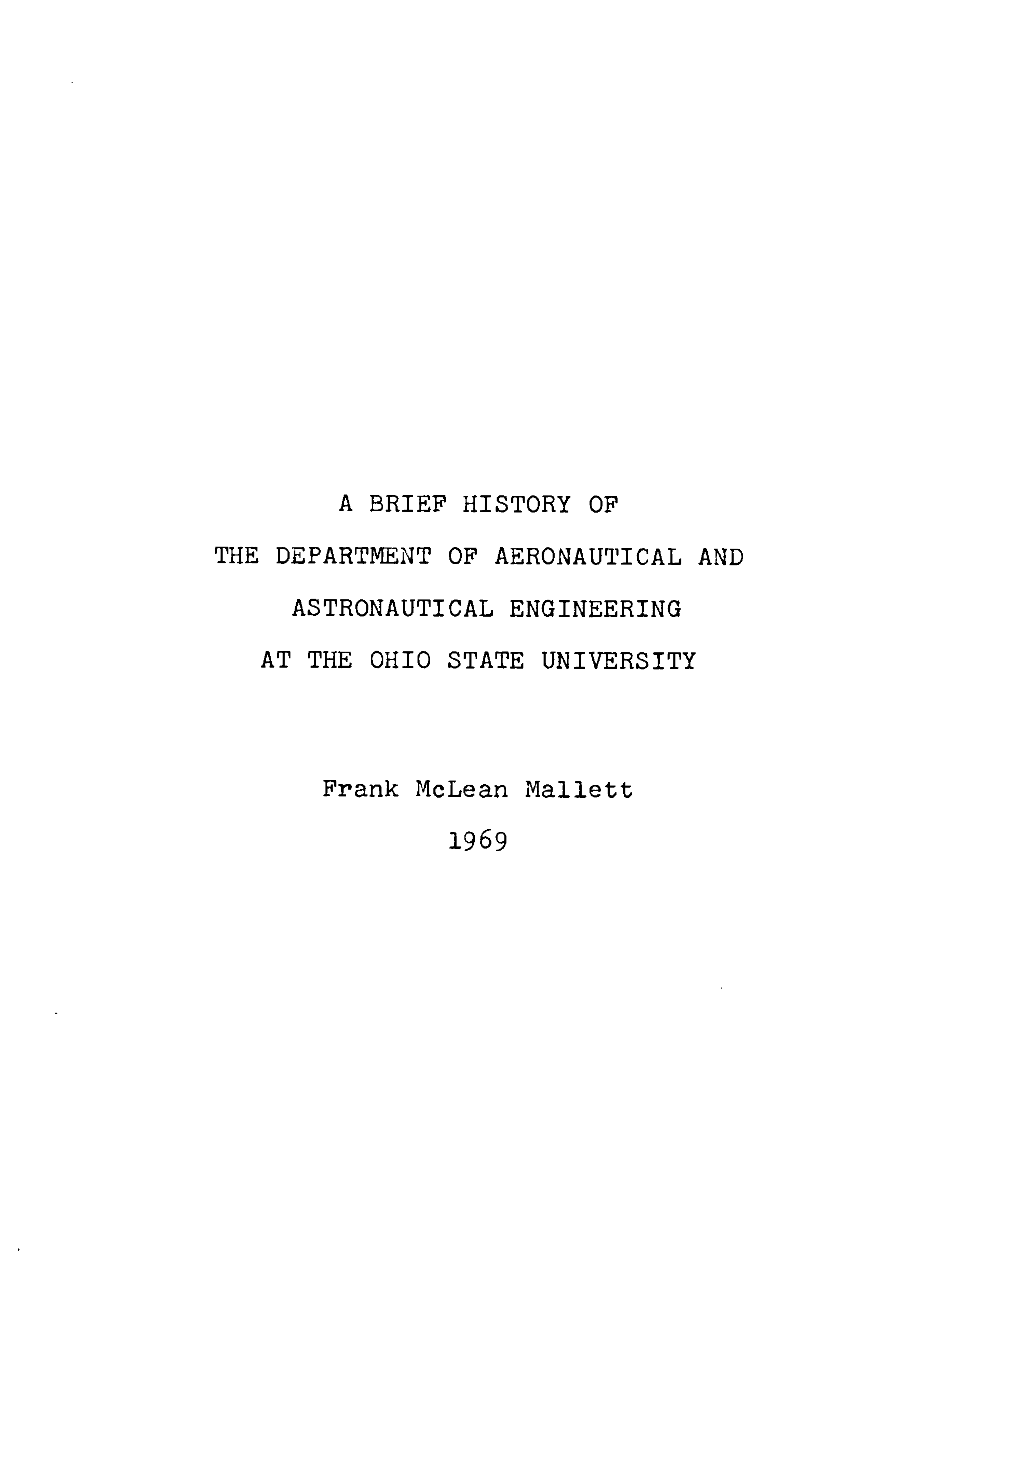 A Brief History of the Department of Aeronautical and Astronautical Engineering at the Ohio State University 1969